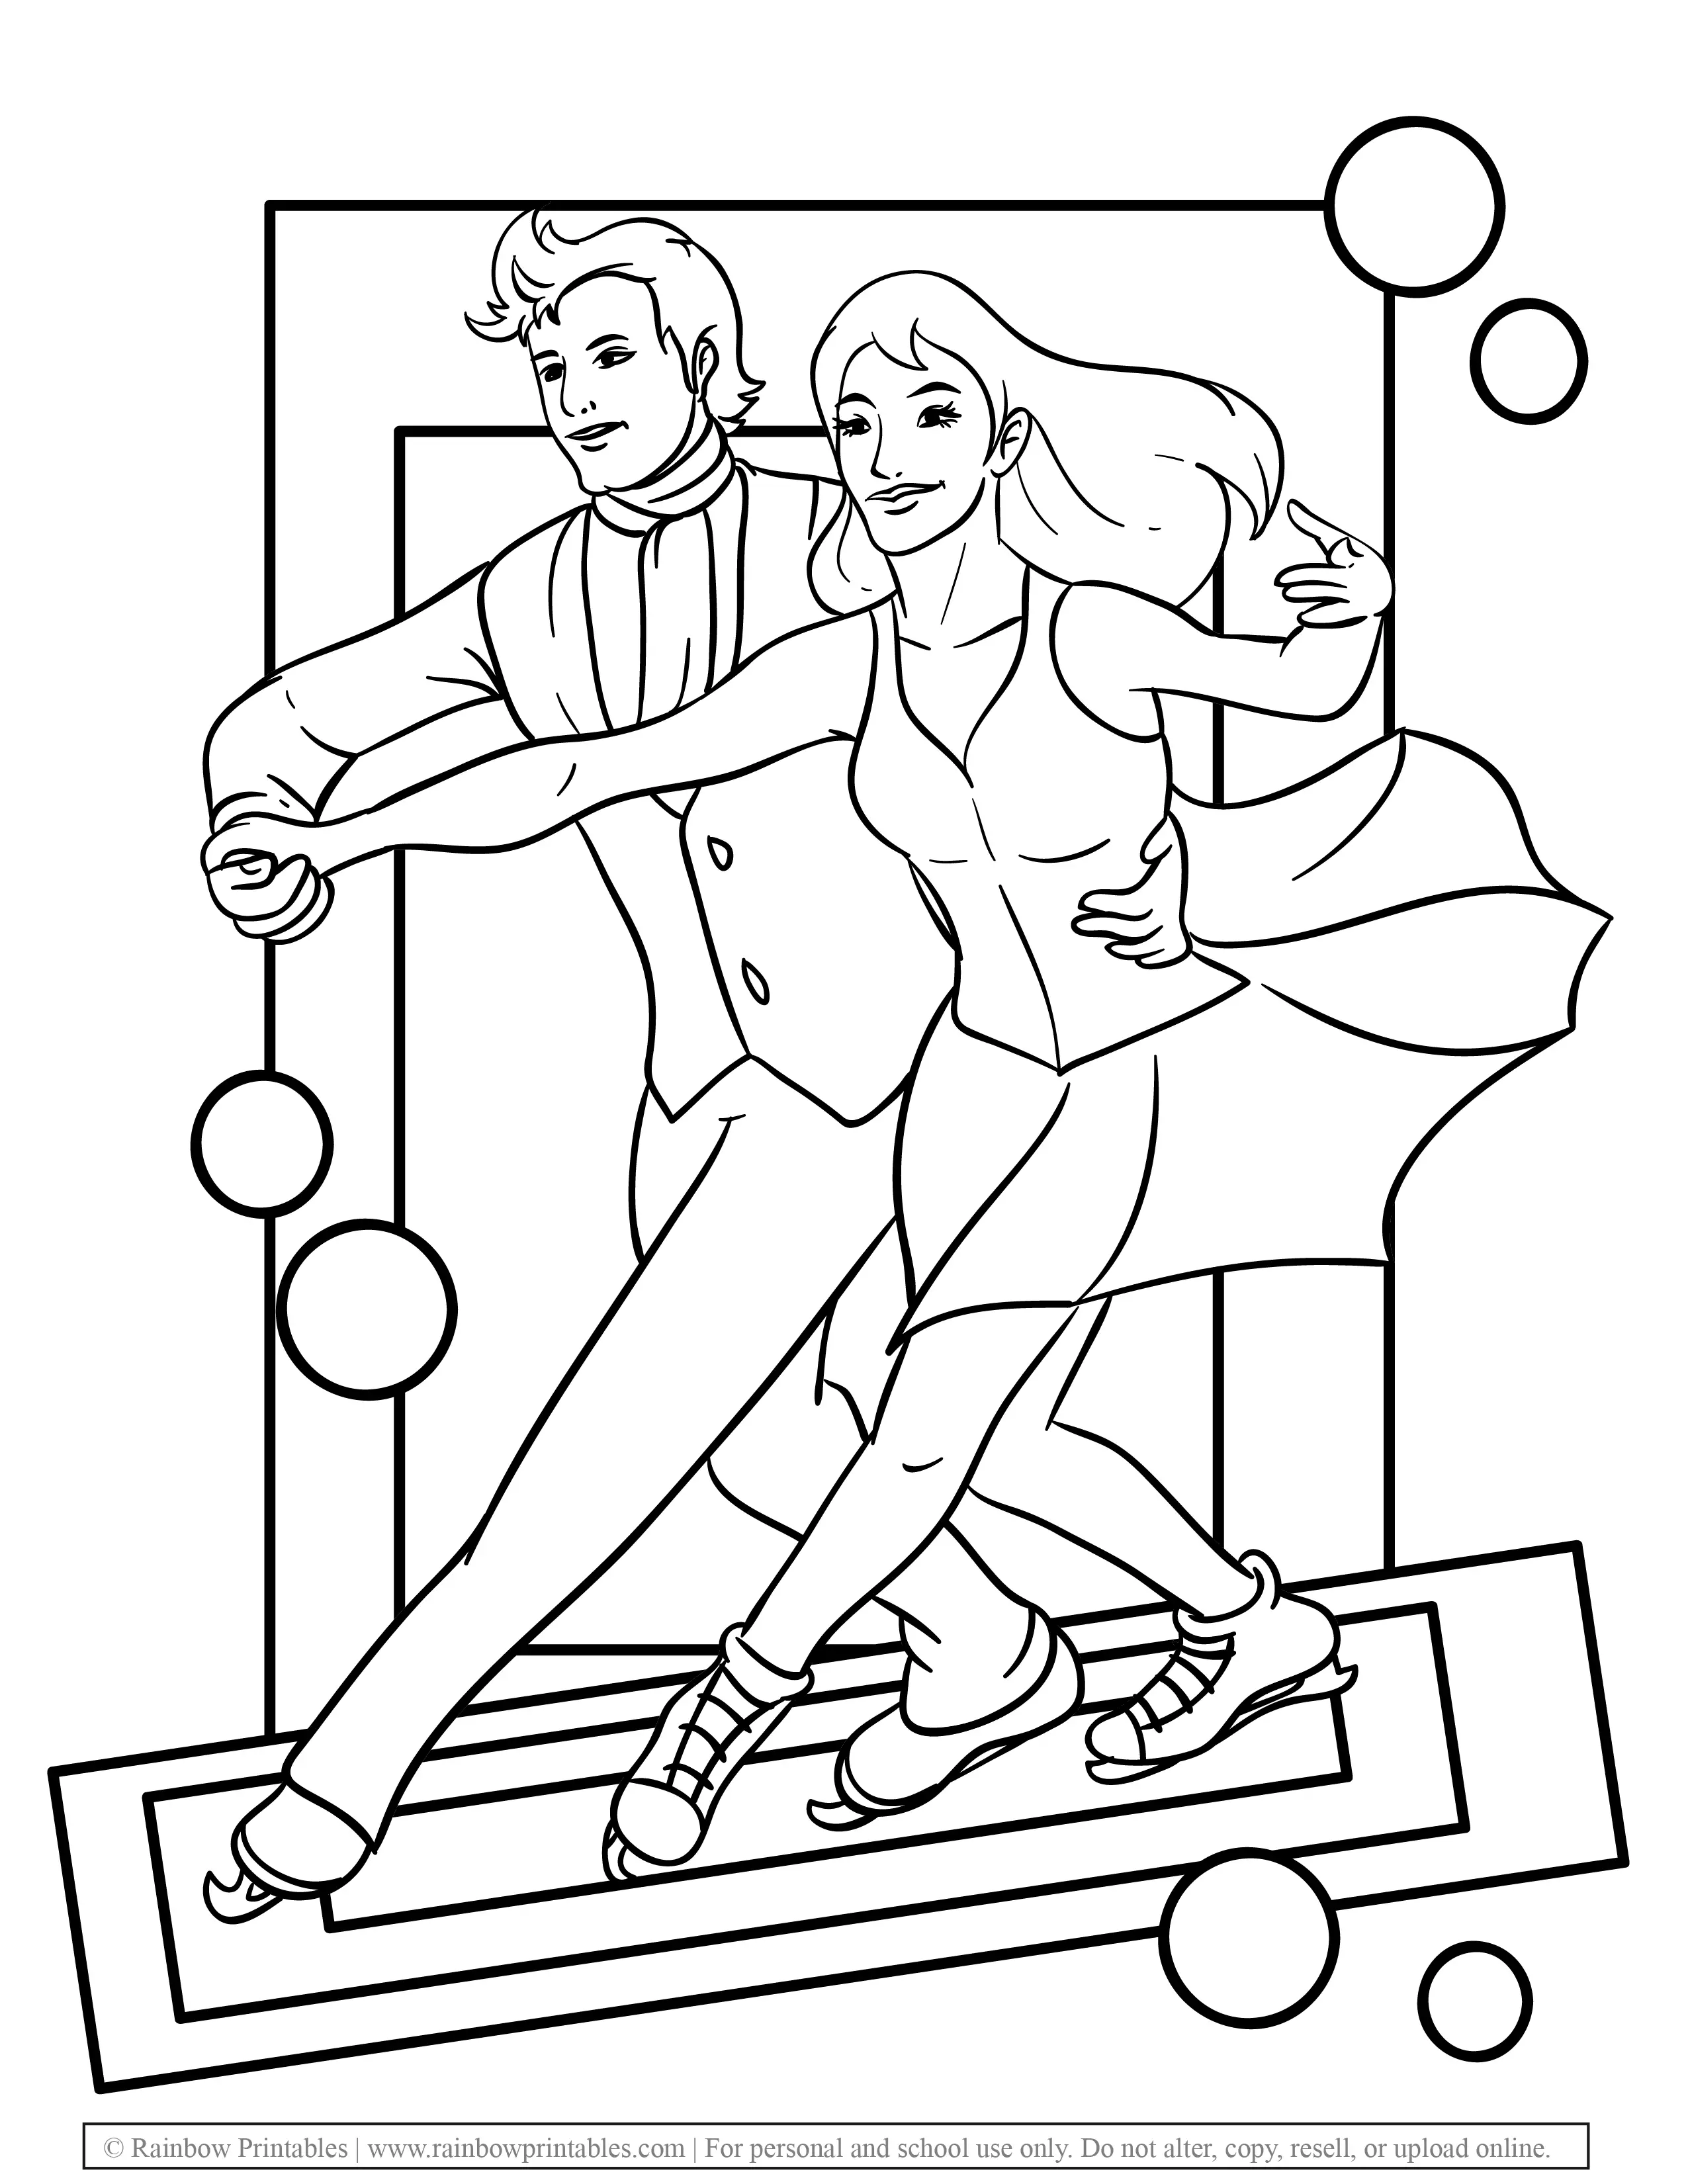 Free Coloring Pages for Kids Drawing Activities Line Art Illustration FIGURE SKATER COUPLE MEN FEMALE ICE SKATE WINTER SPORT